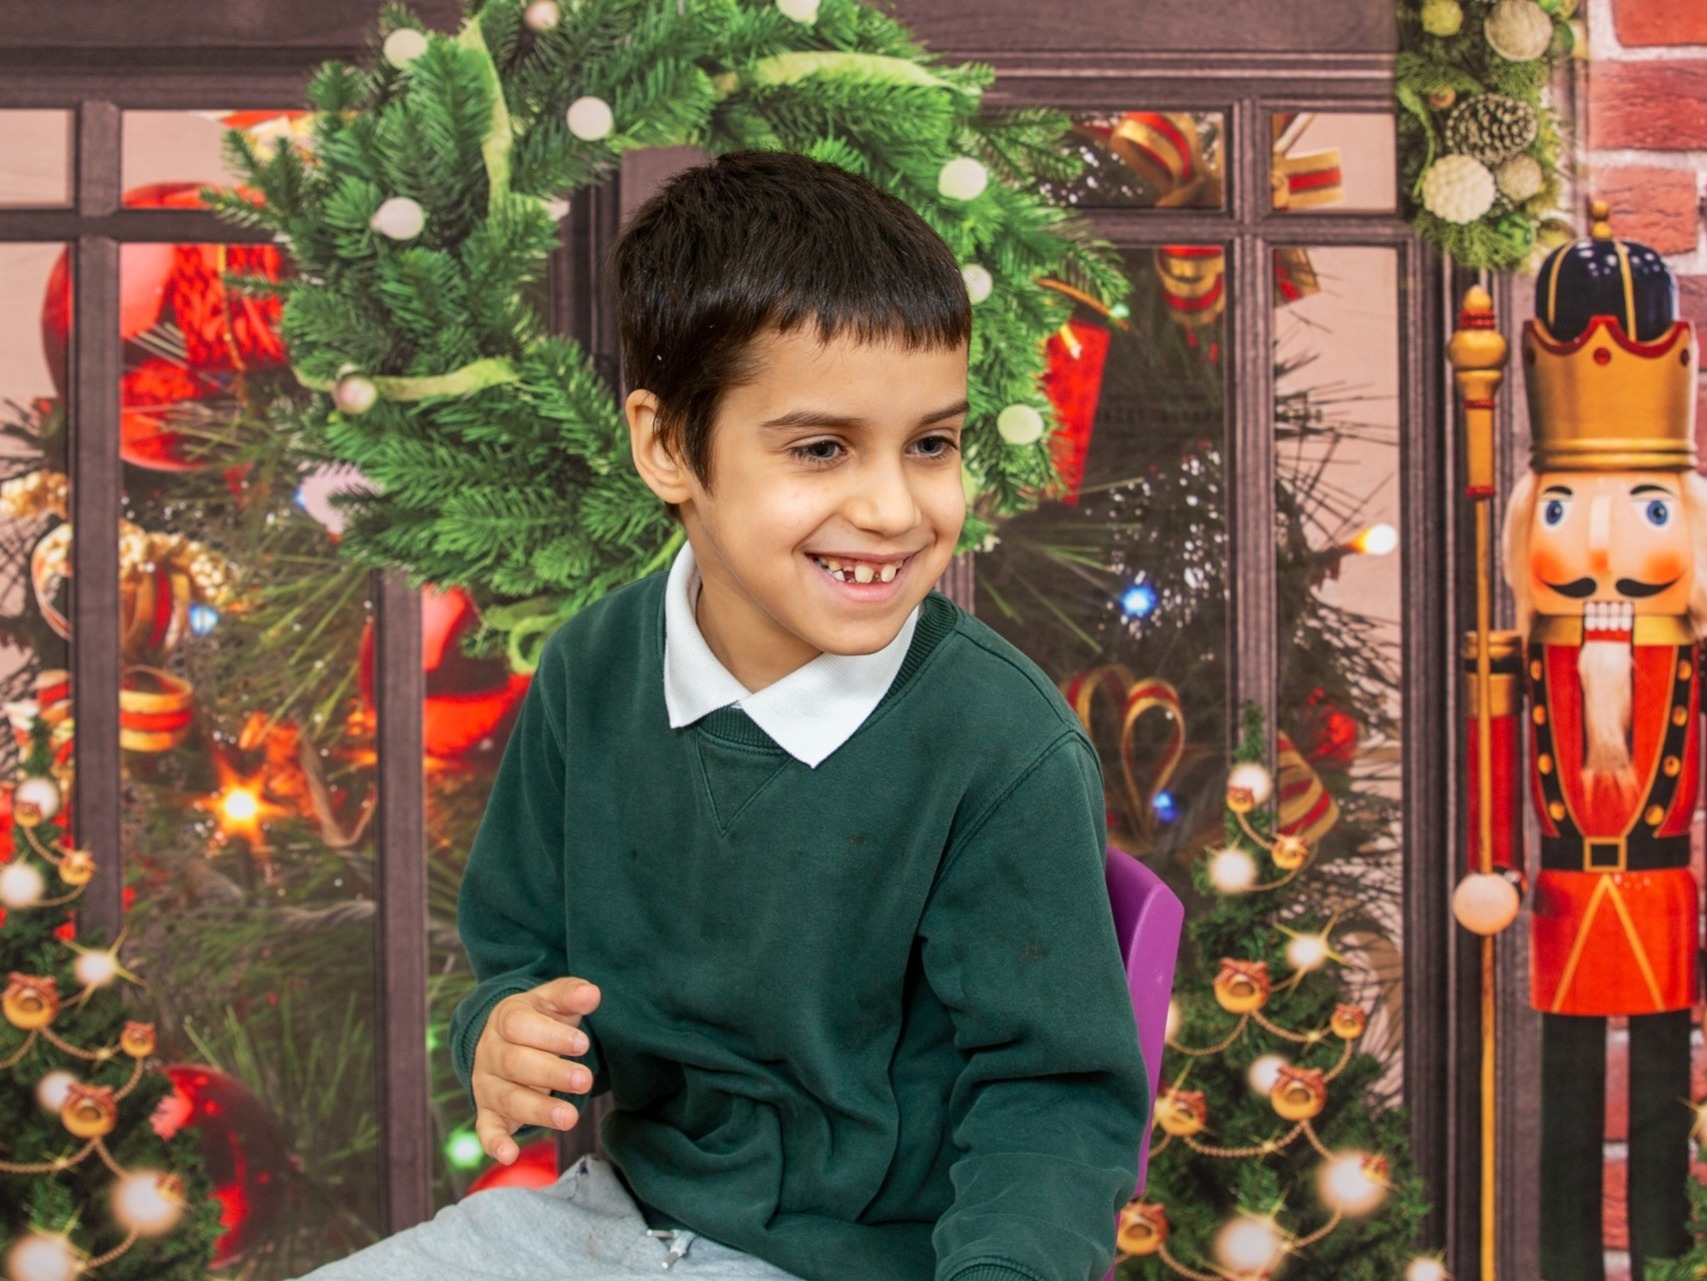 It's the most wonderful time of the year. This young lad thinks so posing in front of our santa's grotto SEN shoot